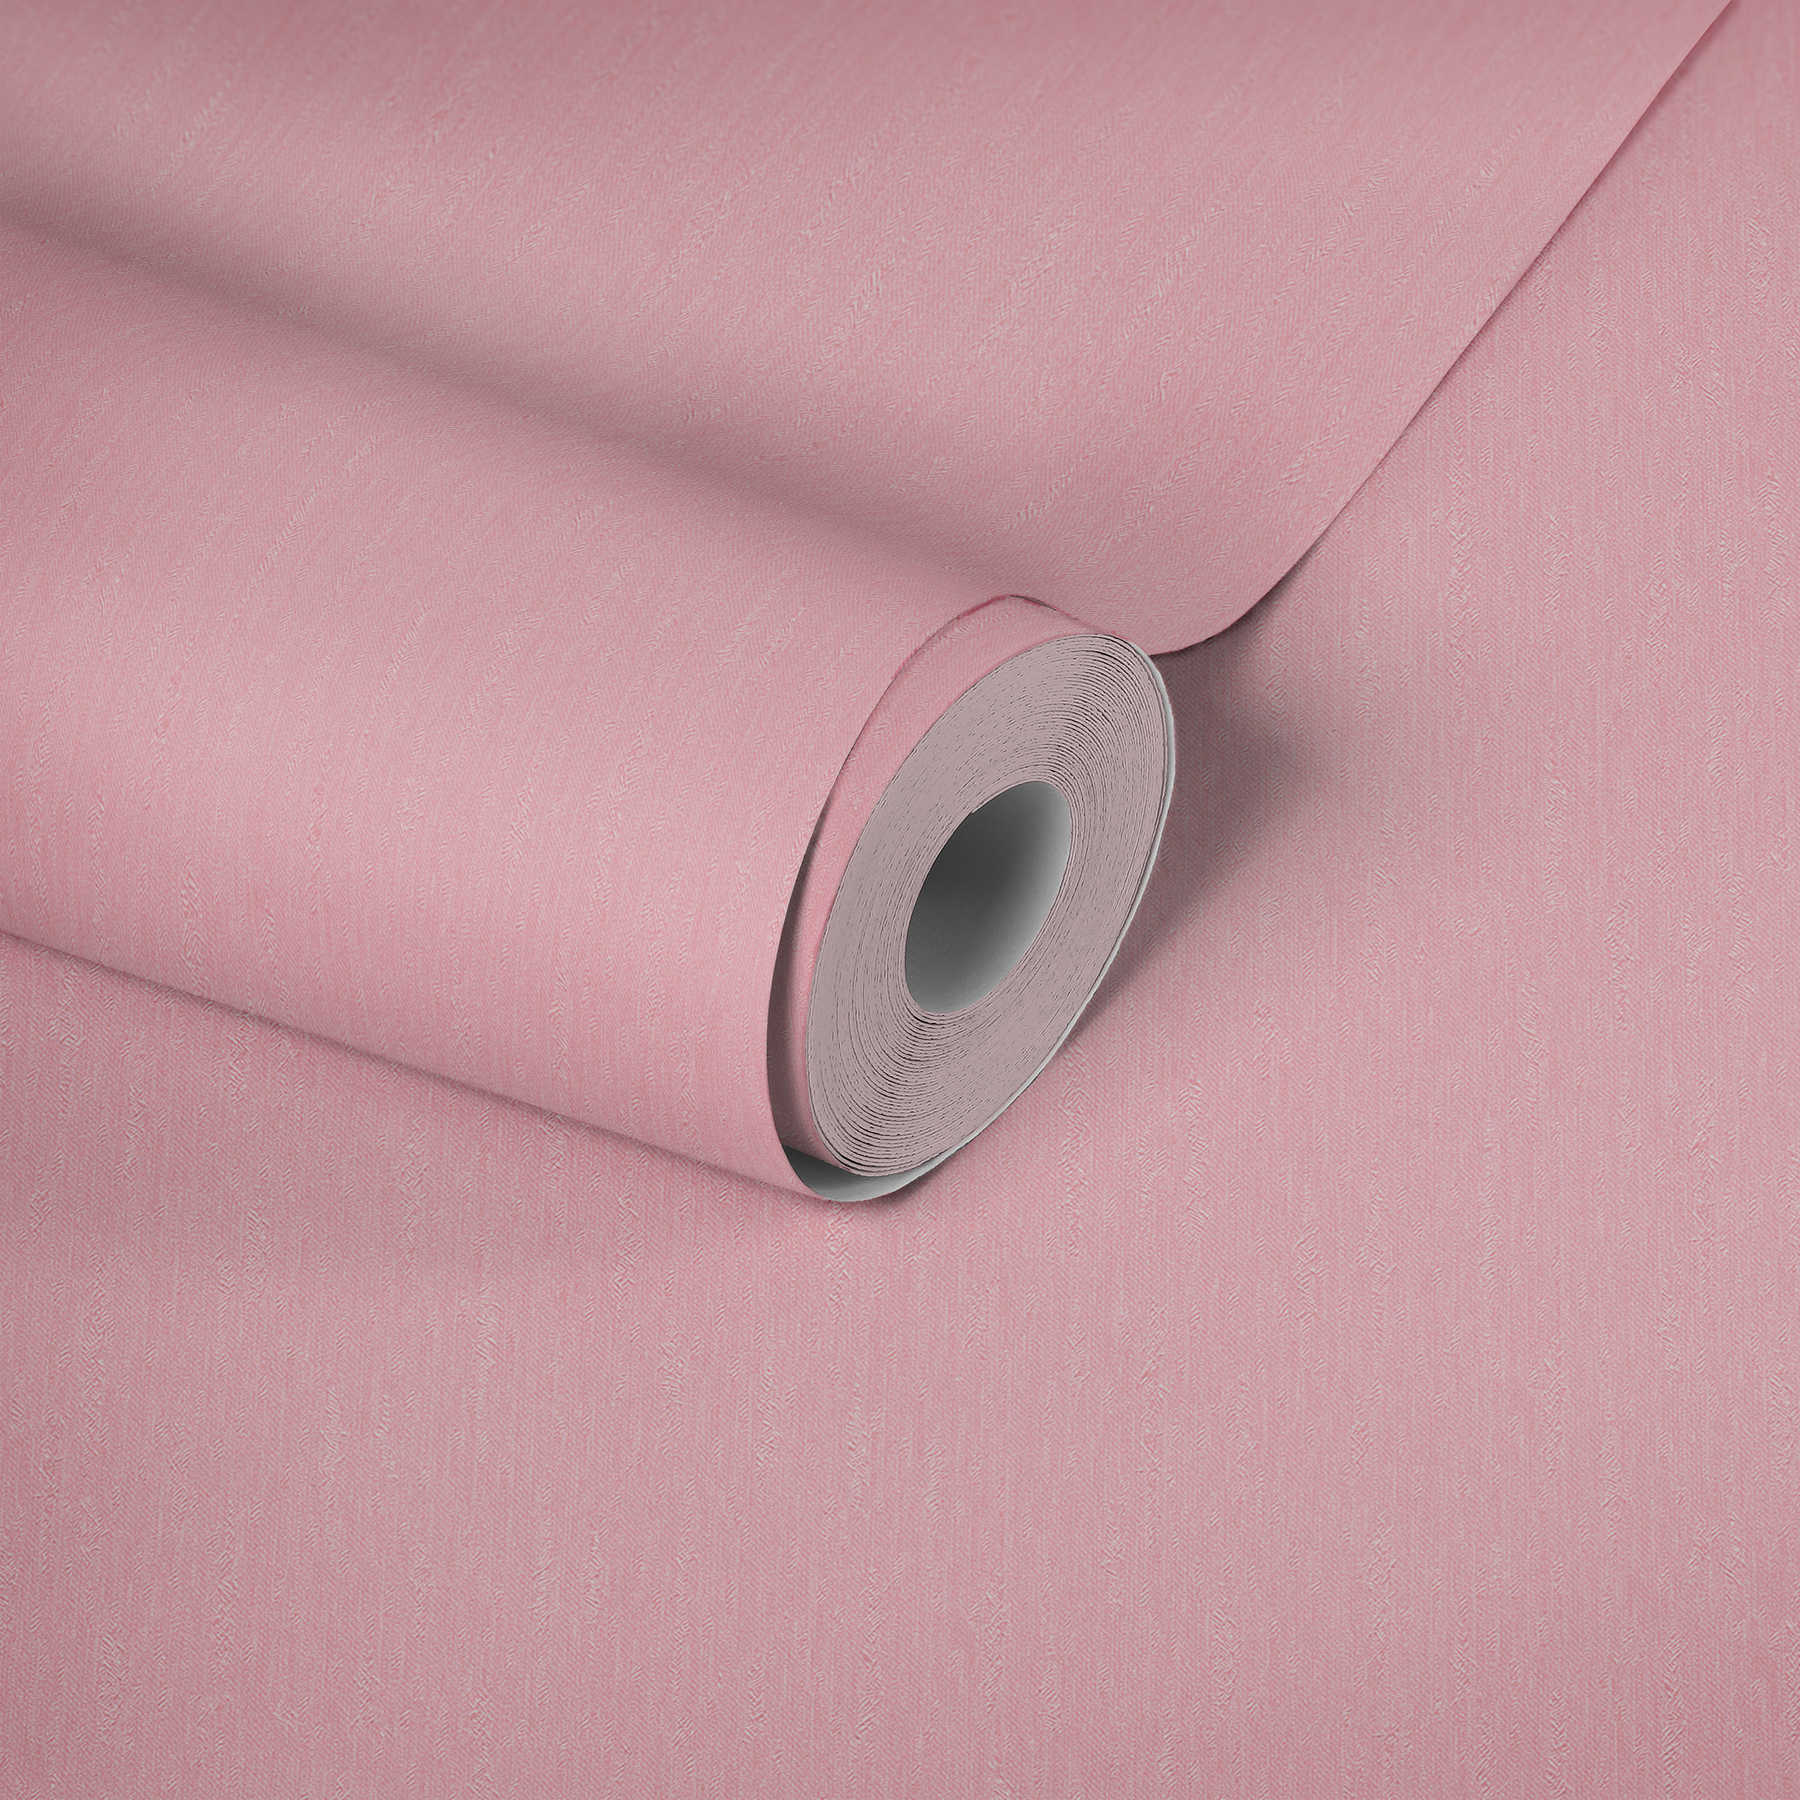             Pink non-woven wallpaper plain light pink with texture surface
        